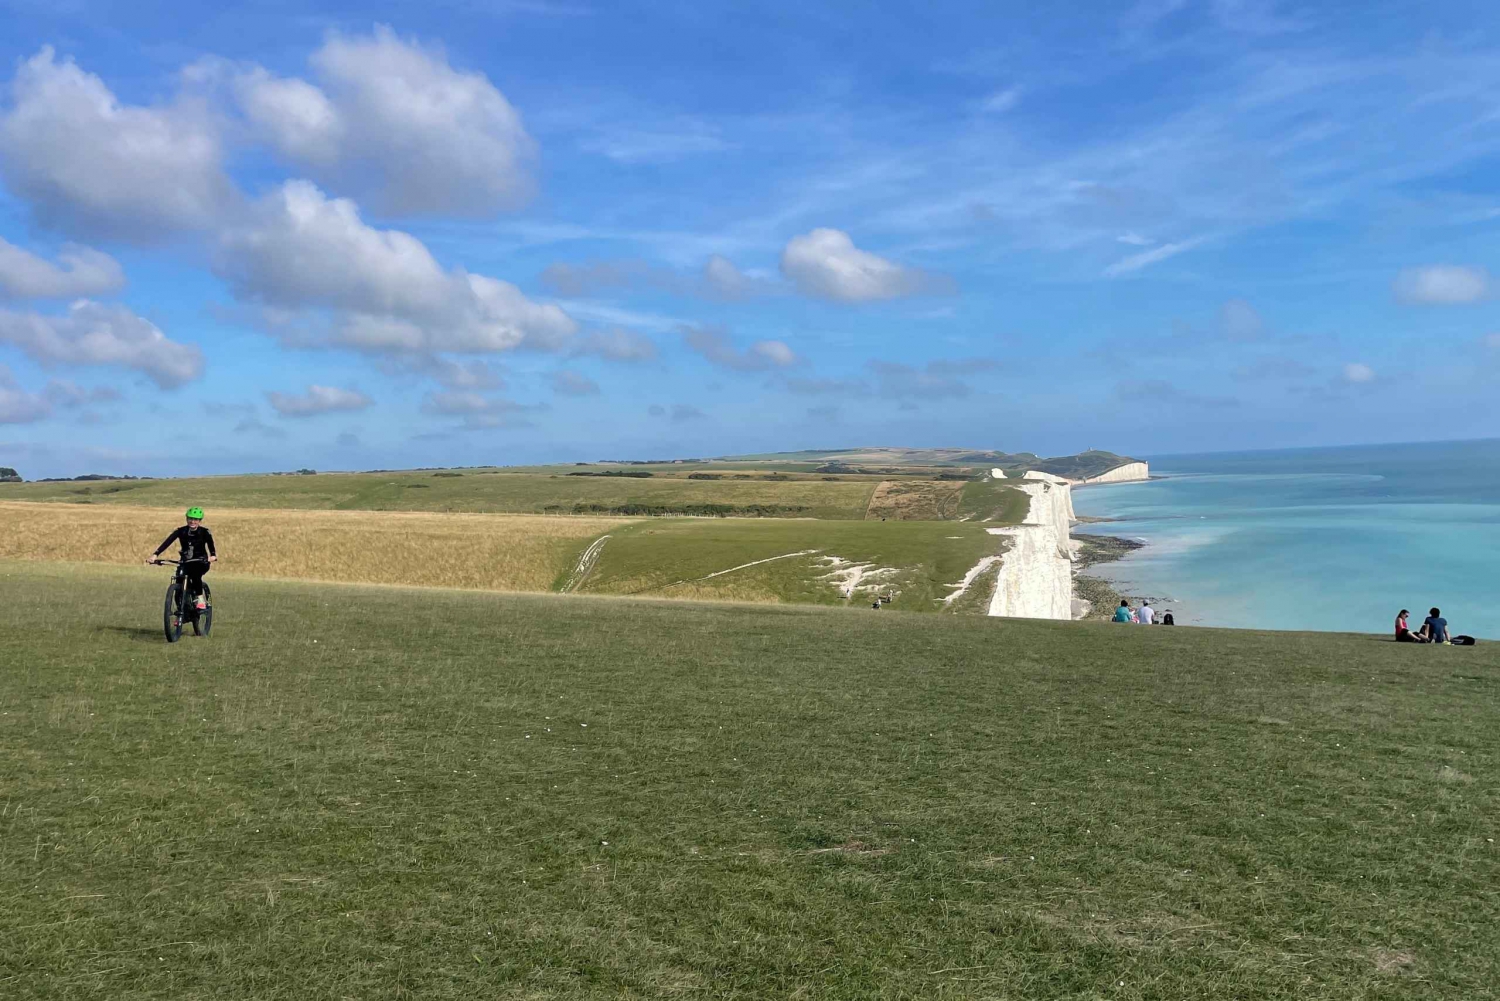 E-Bike on an adventure through Seven Sisters Country Park